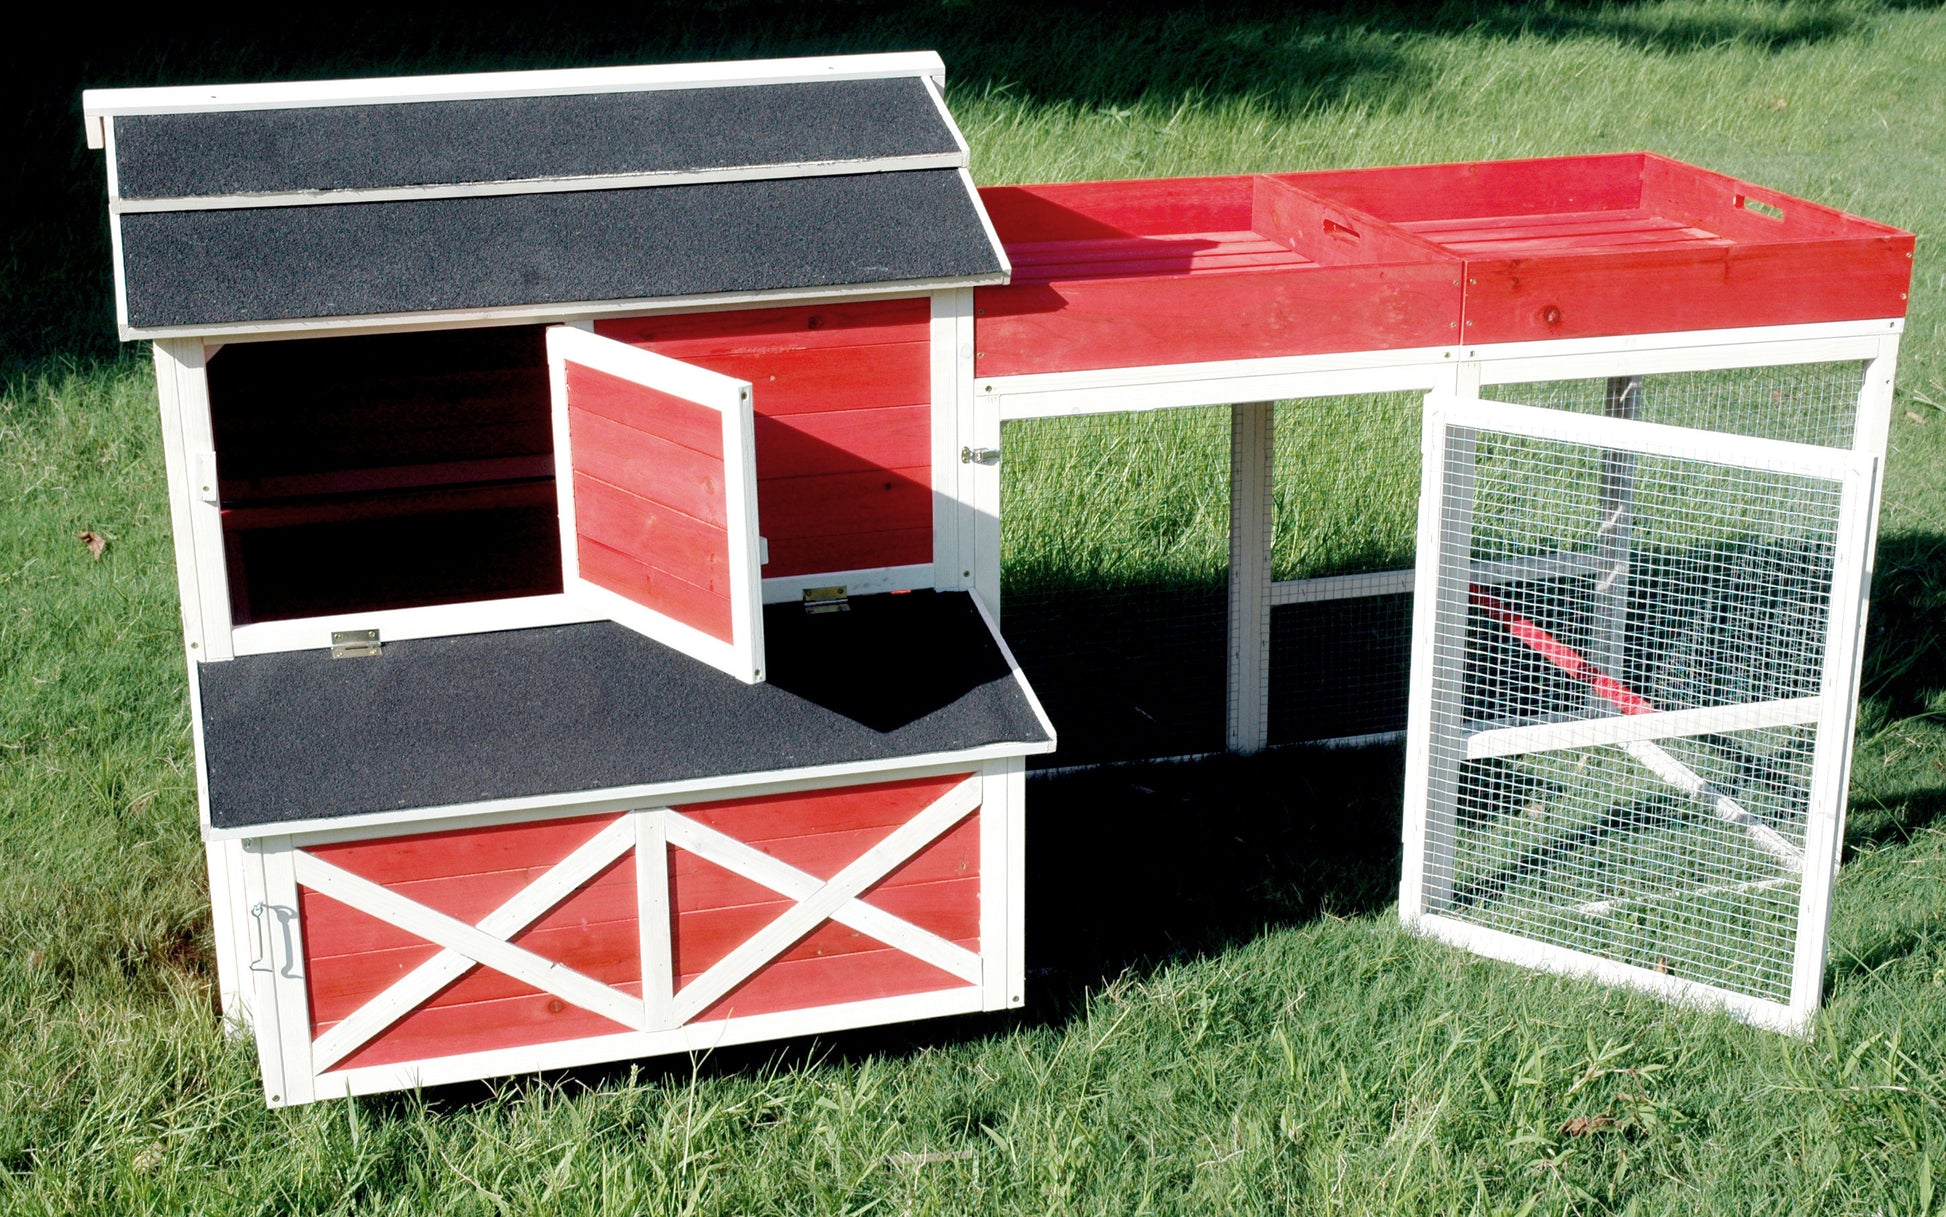 Red Barn Chicken Coop with Roof Top Planter, Chicken Coop - Yardify.com